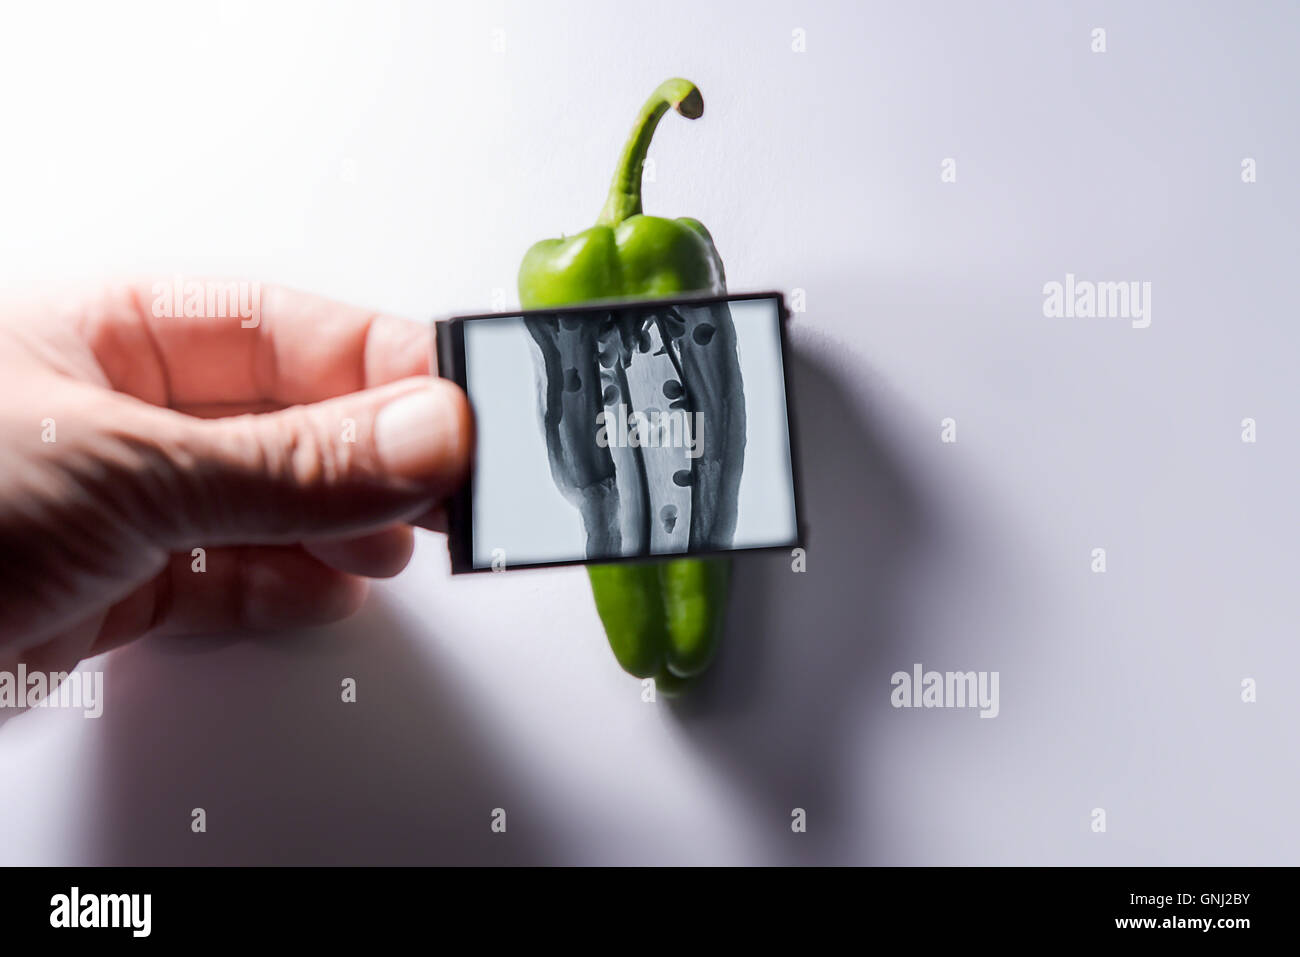 Hand holding x-ray image in front of green pepper Stock Photo